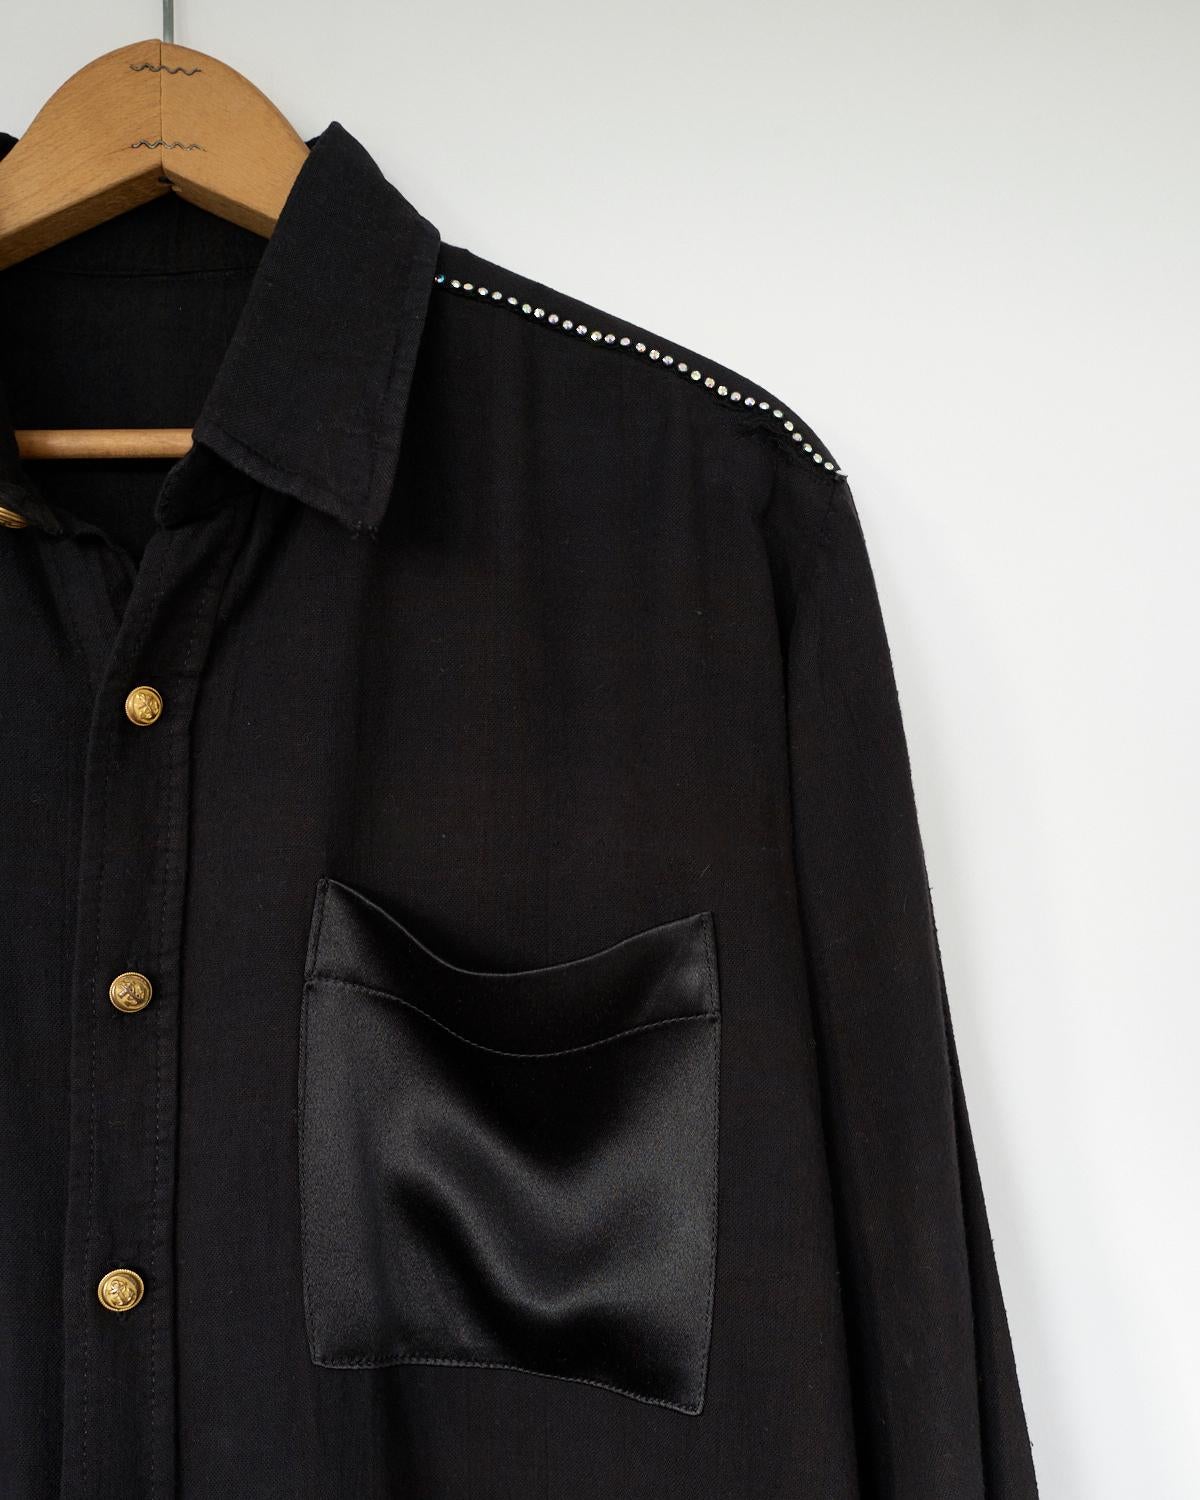 One of a kind Embellished Black Shirt Rhinestones Black Cotton Gold Buttons 
Brand: J Dauphin
Size
Sustainable Luxury, Collectible Vintage Re- Purposed

Our one of a kind, zero waste, up-cycled jackets are made from vintage, natural fibers, military